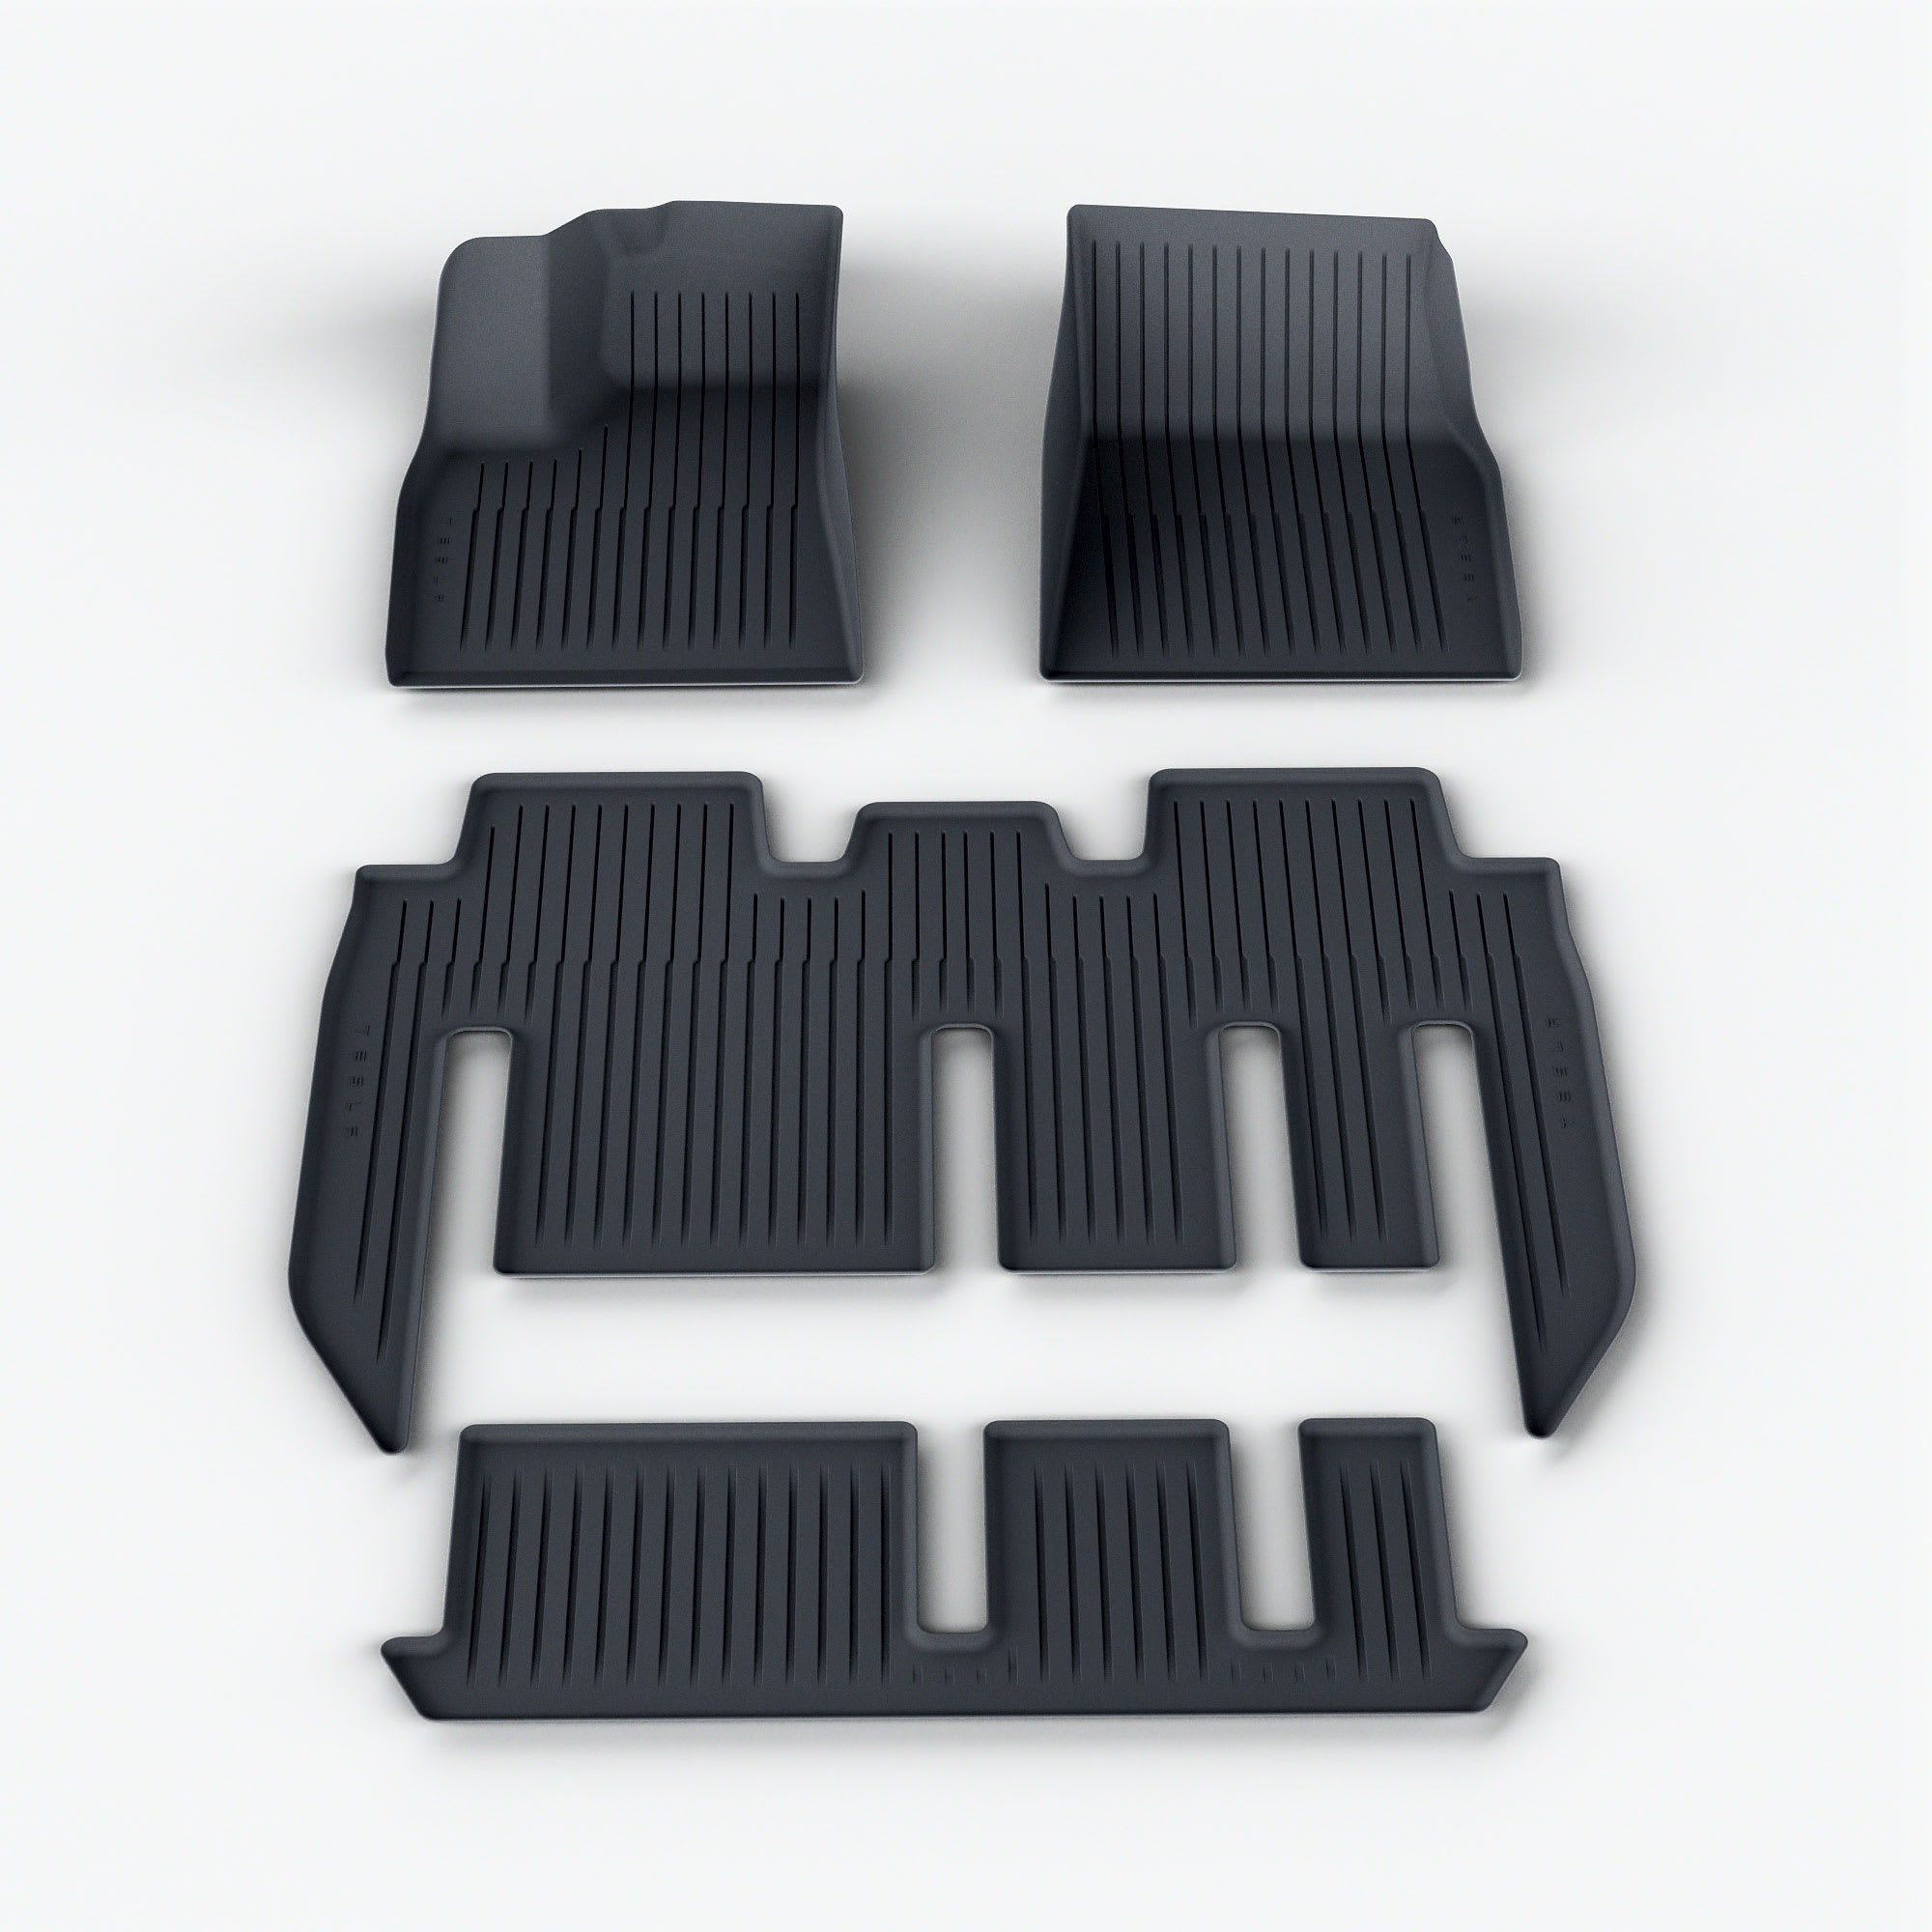 Model X All-Weather Interior Liners